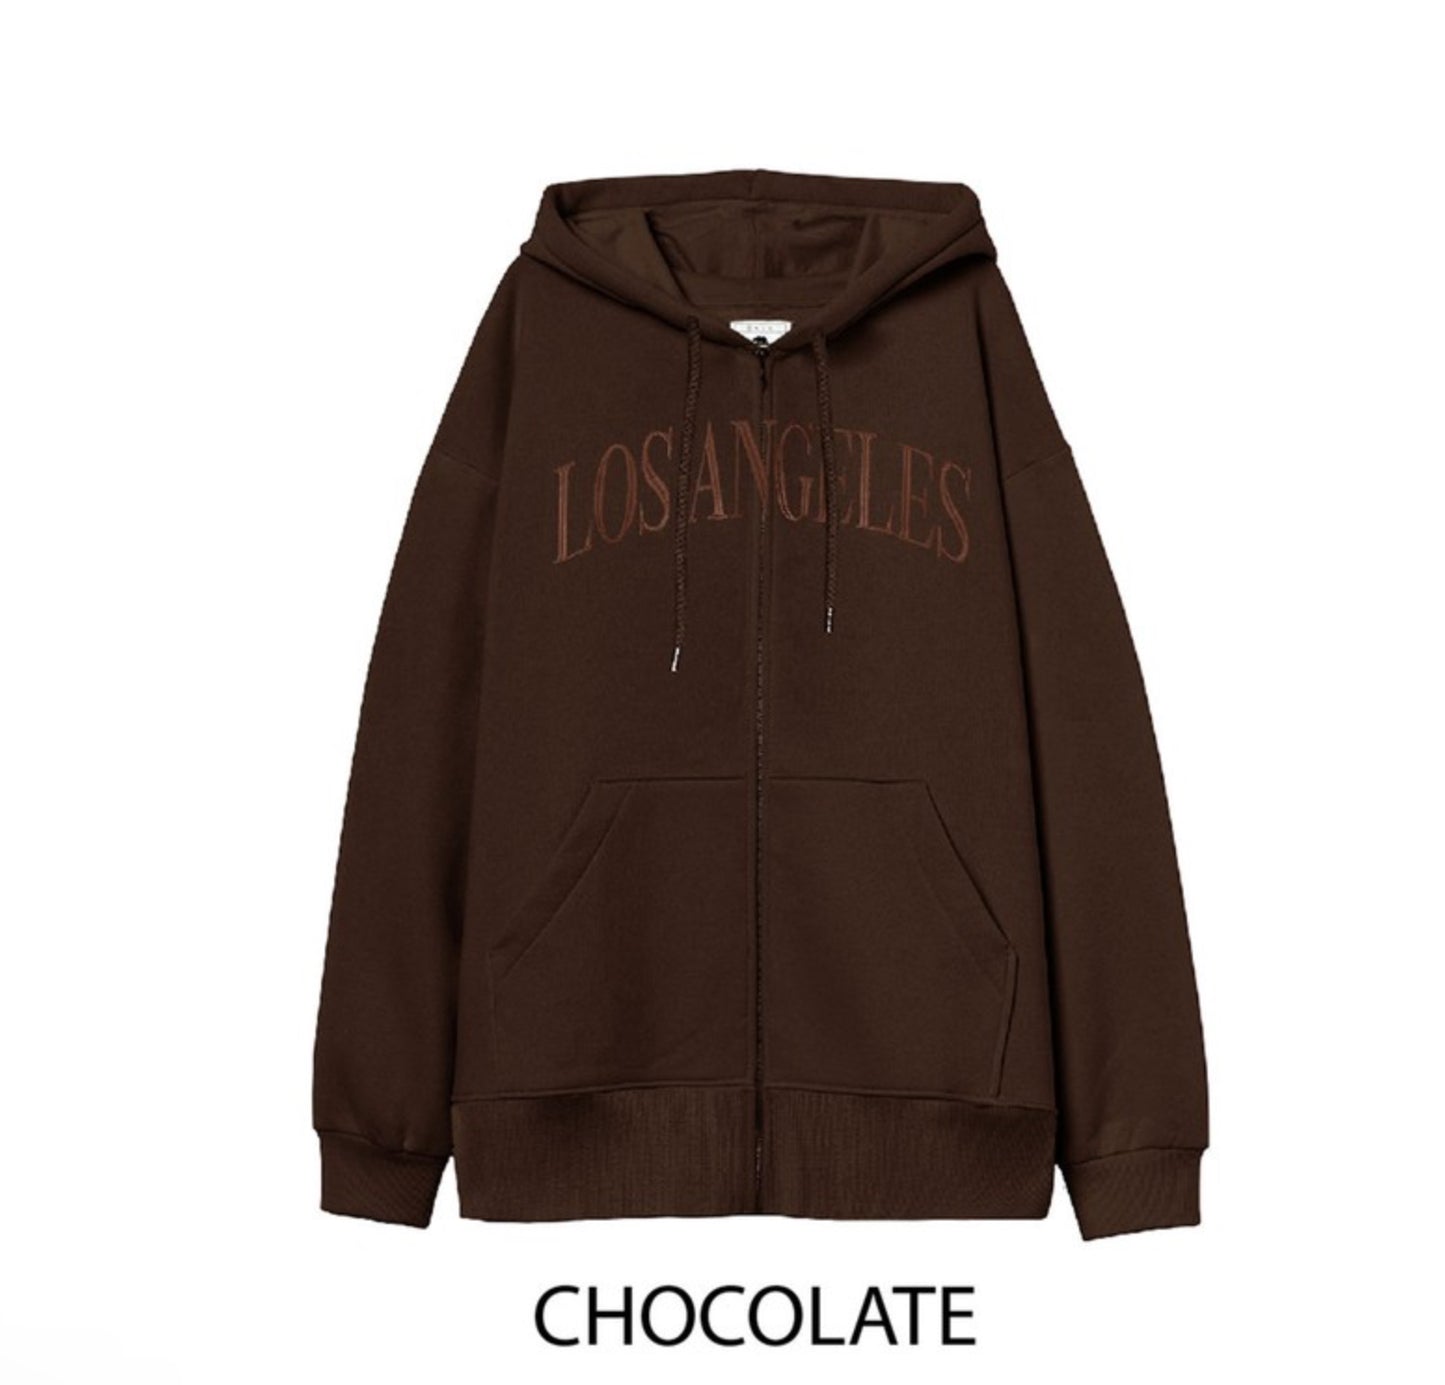 Los Angeles Embroidered Zip Up Sweater - Chocolate brown